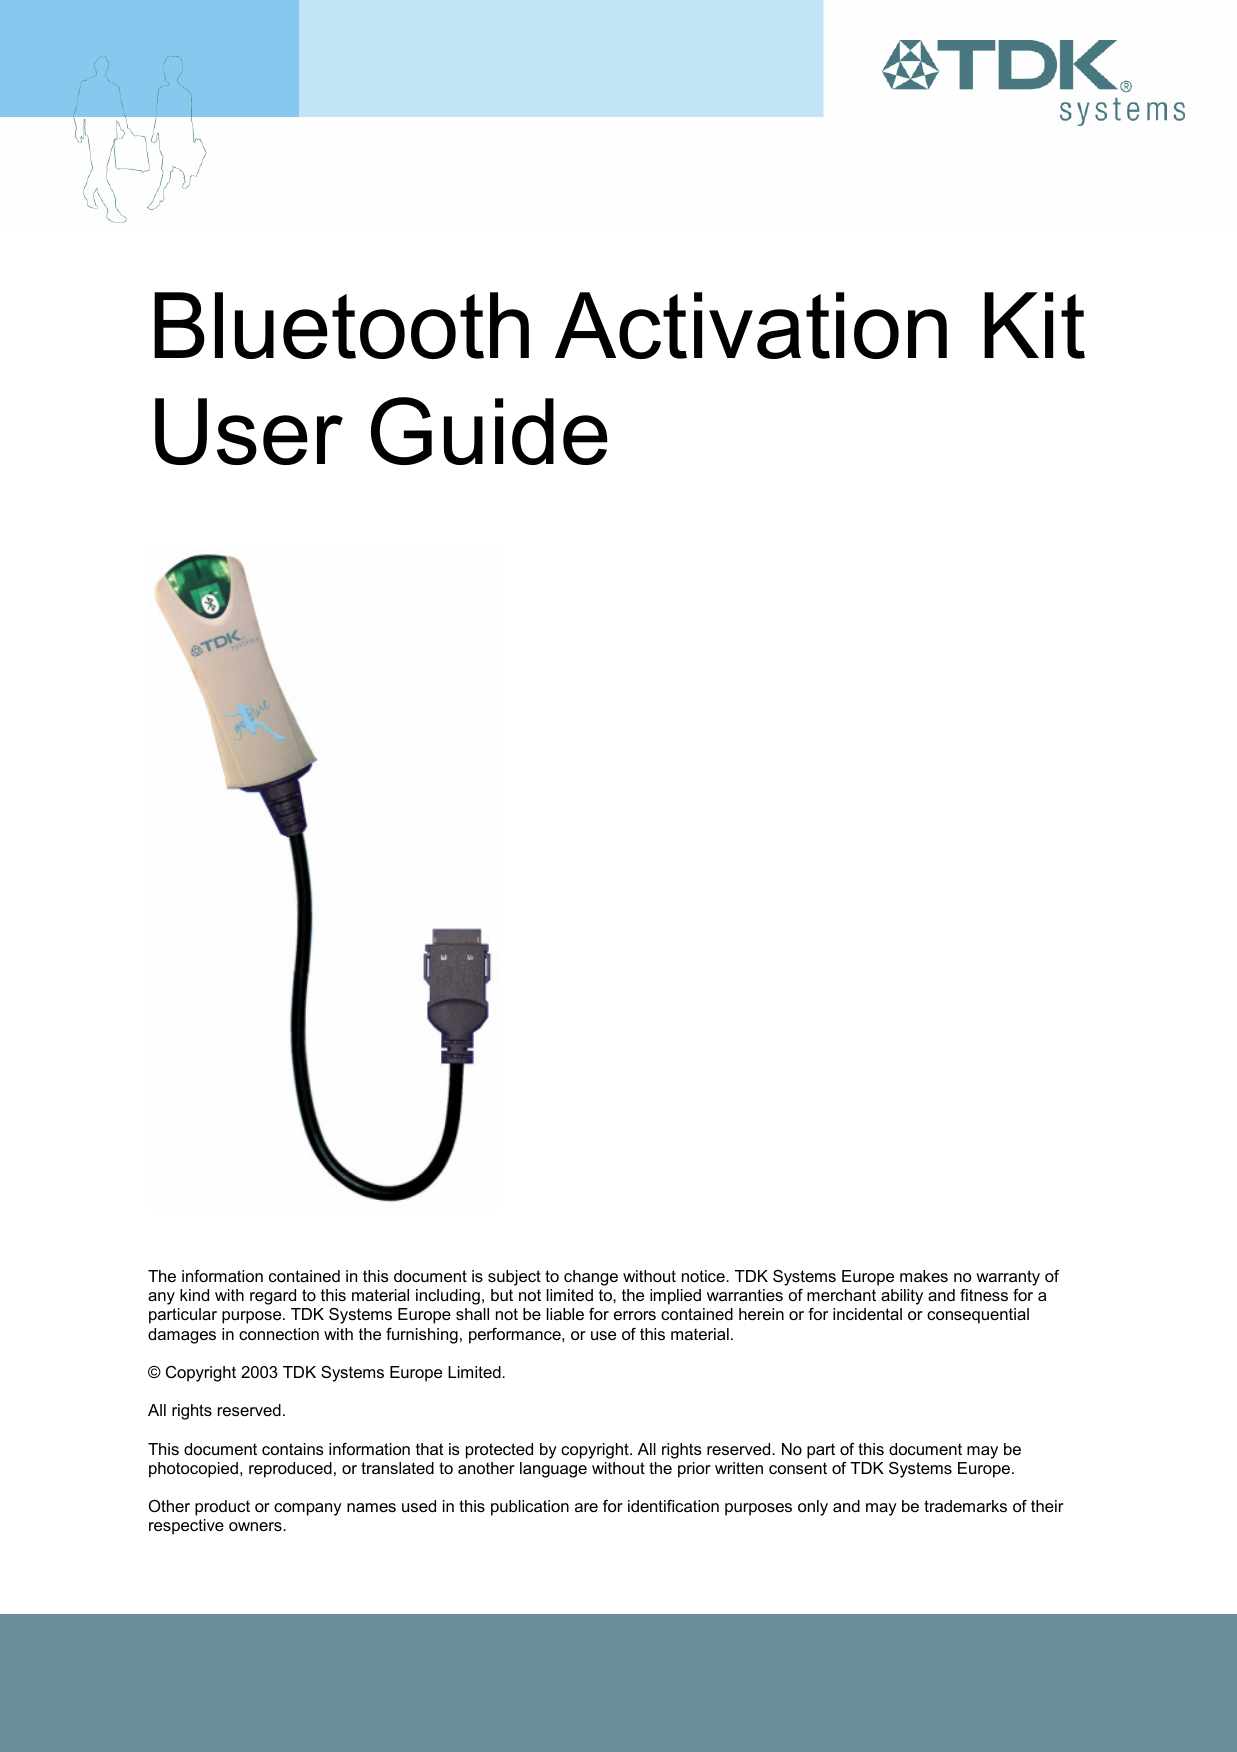 Bluetooth Activation Kit User Guide        The information contained in this document is subject to change without notice. TDK Systems Europe makes no warranty of any kind with regard to this material including, but not limited to, the implied warranties of merchant ability and fitness for a particular purpose. TDK Systems Europe shall not be liable for errors contained herein or for incidental or consequential damages in connection with the furnishing, performance, or use of this material.  © Copyright 2003 TDK Systems Europe Limited.  All rights reserved.  This document contains information that is protected by copyright. All rights reserved. No part of this document may be photocopied, reproduced, or translated to another language without the prior written consent of TDK Systems Europe.  Other product or company names used in this publication are for identification purposes only and may be trademarks of their respective owners. 